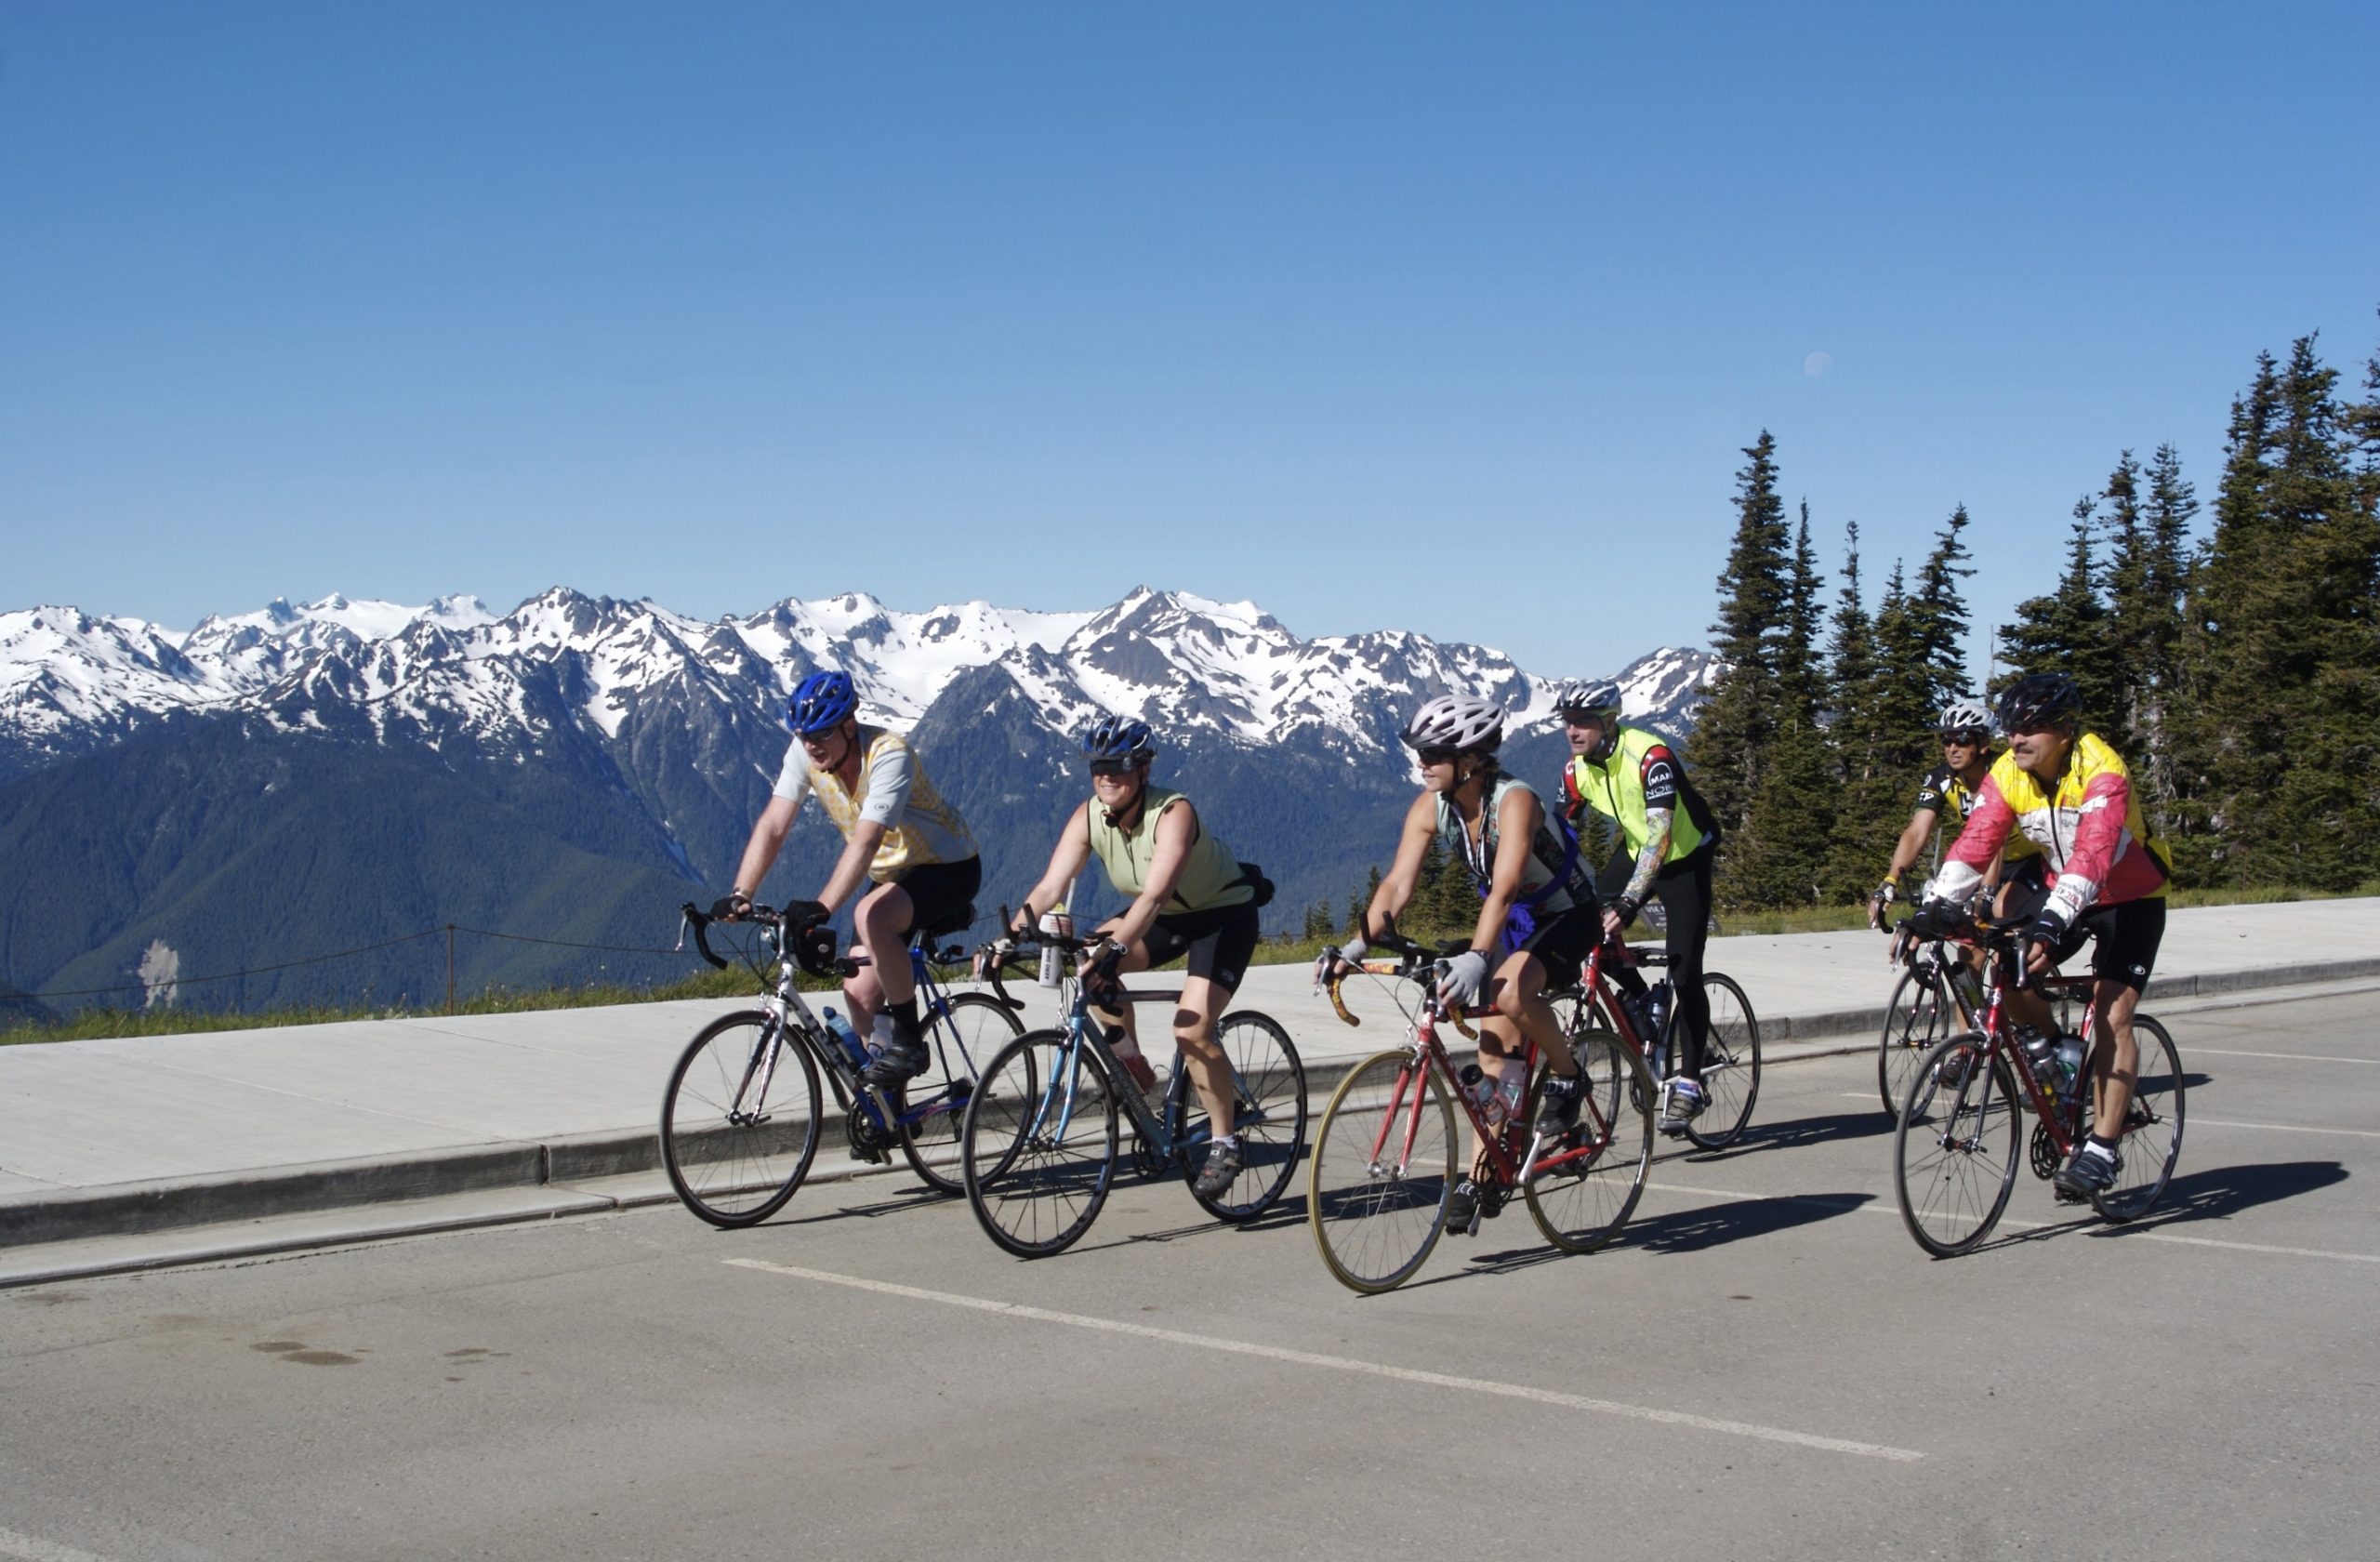 Bicyclists with mountains and trees